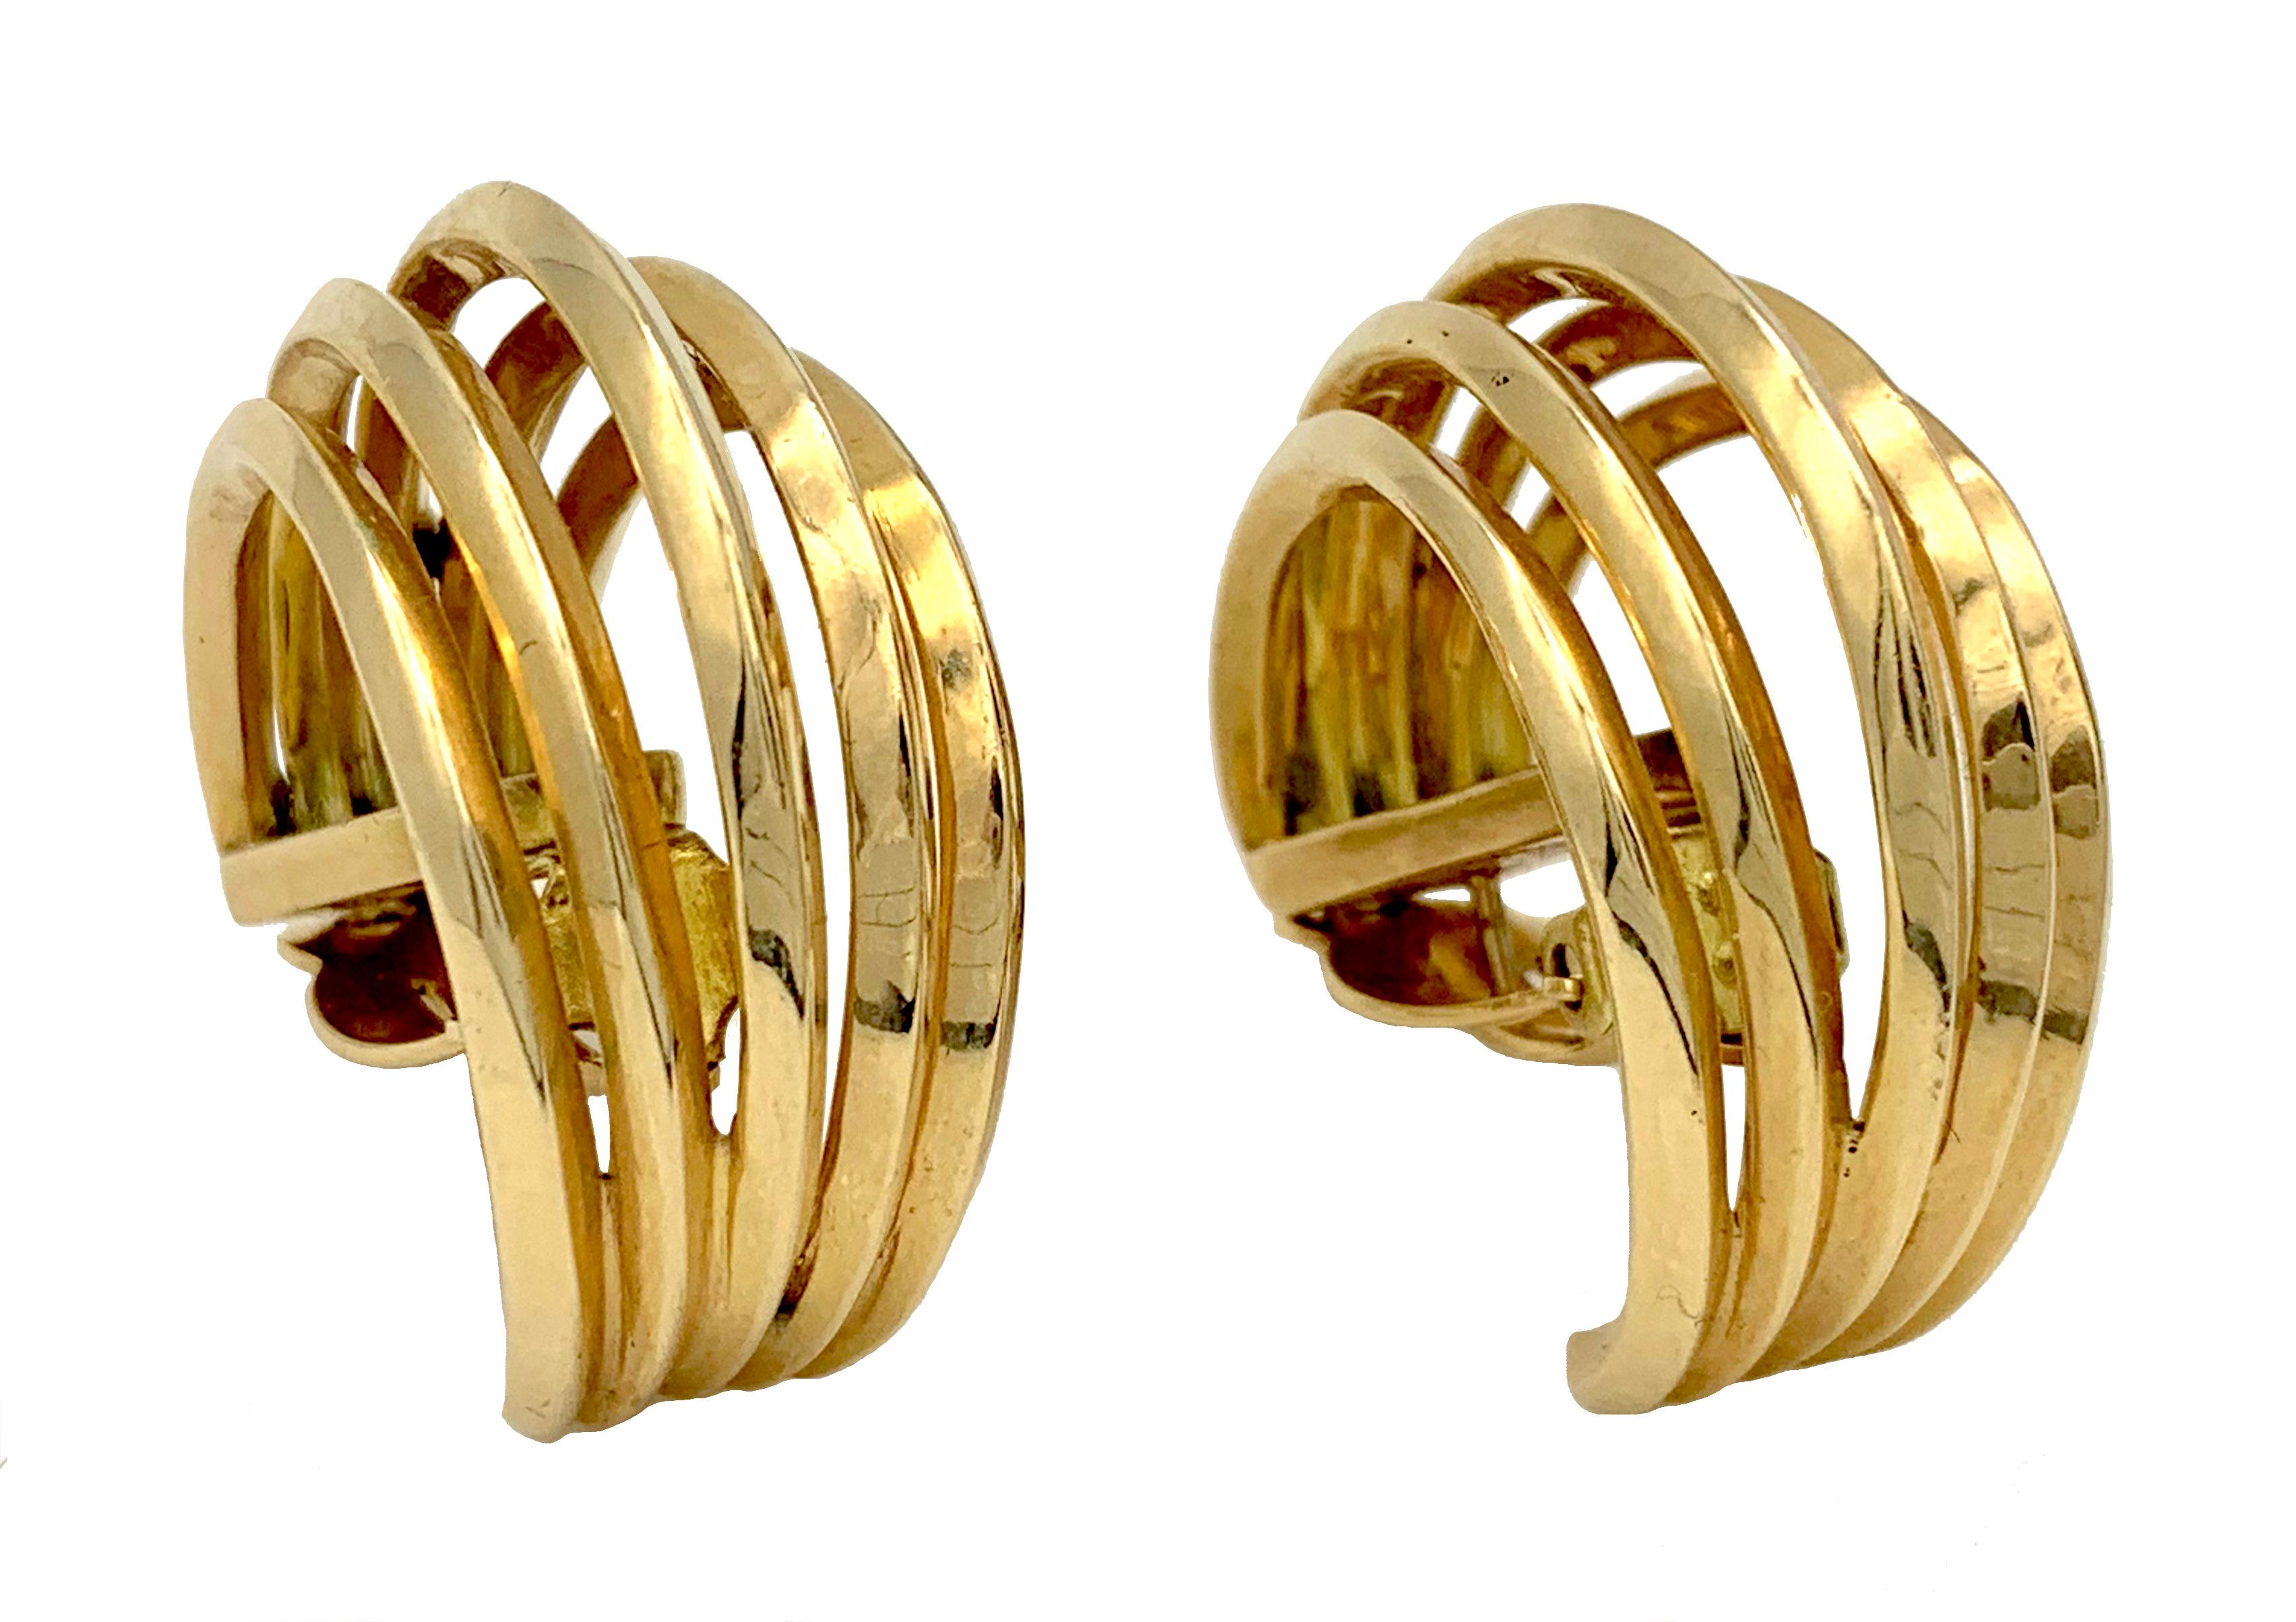 These substantial clip- on- earrings are made out of 14 karat gold and are designed as five three quarter hoops.